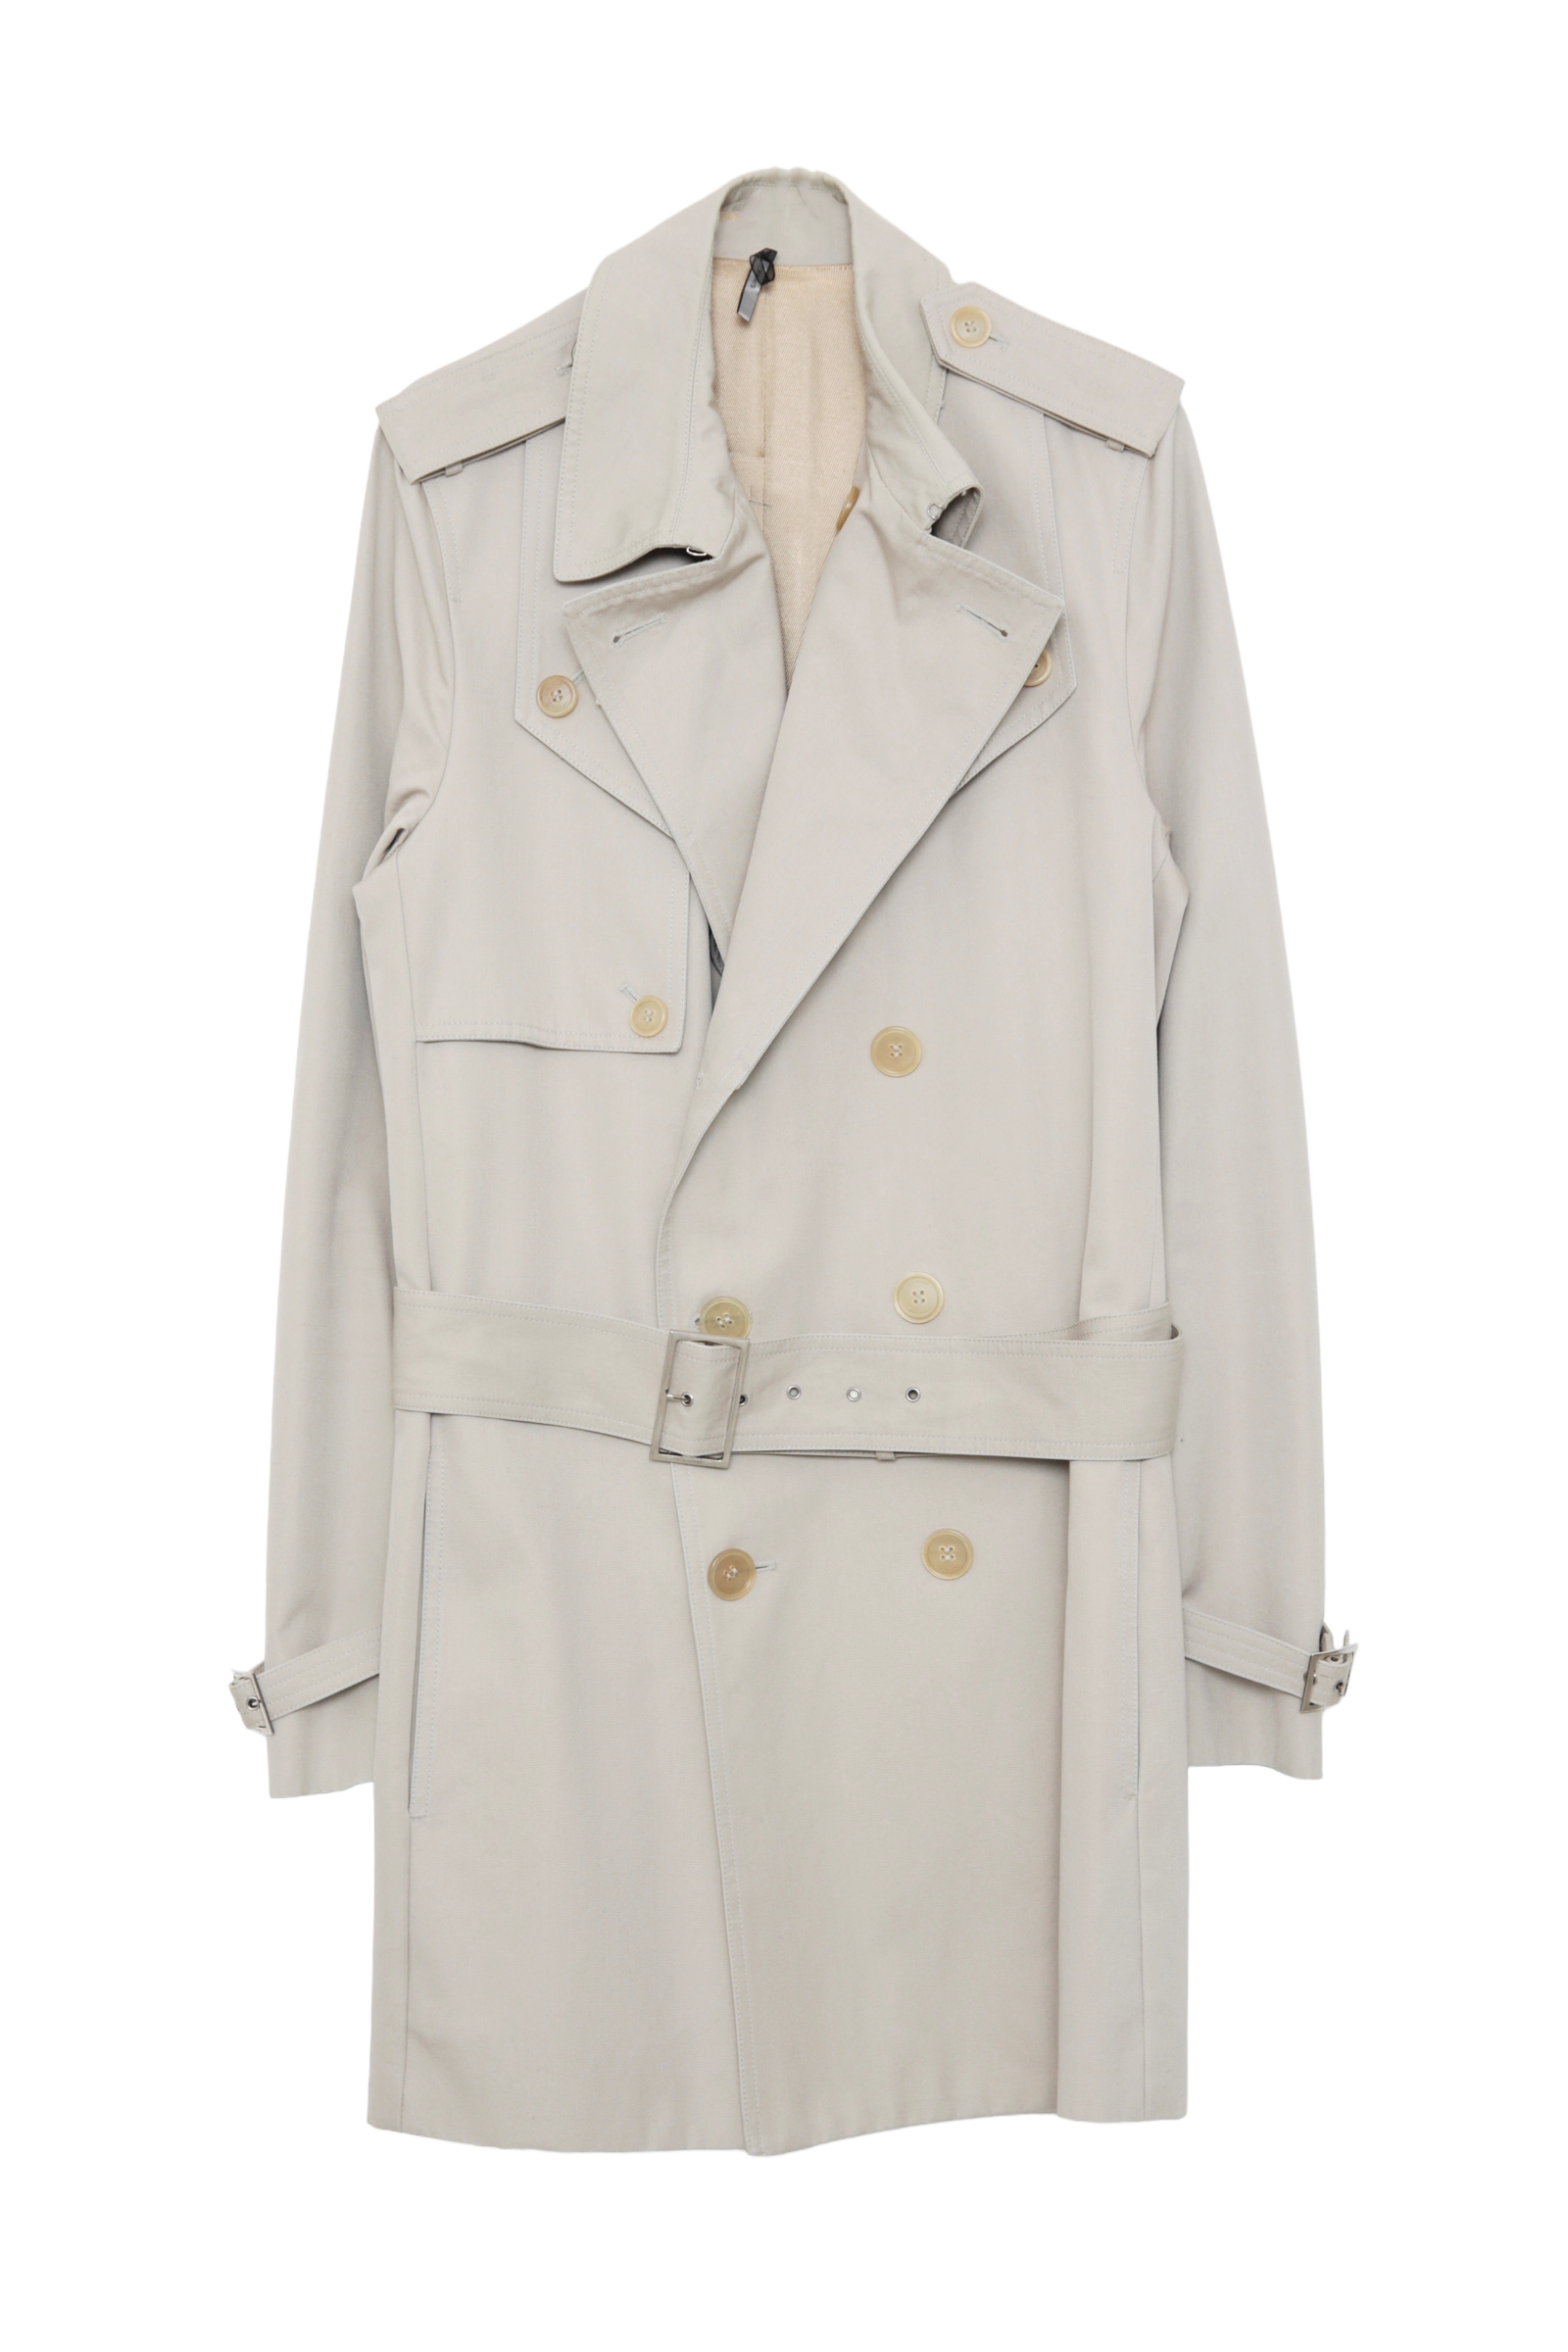 2009S/S DIOR HOMME COTTON TRENCH COAT